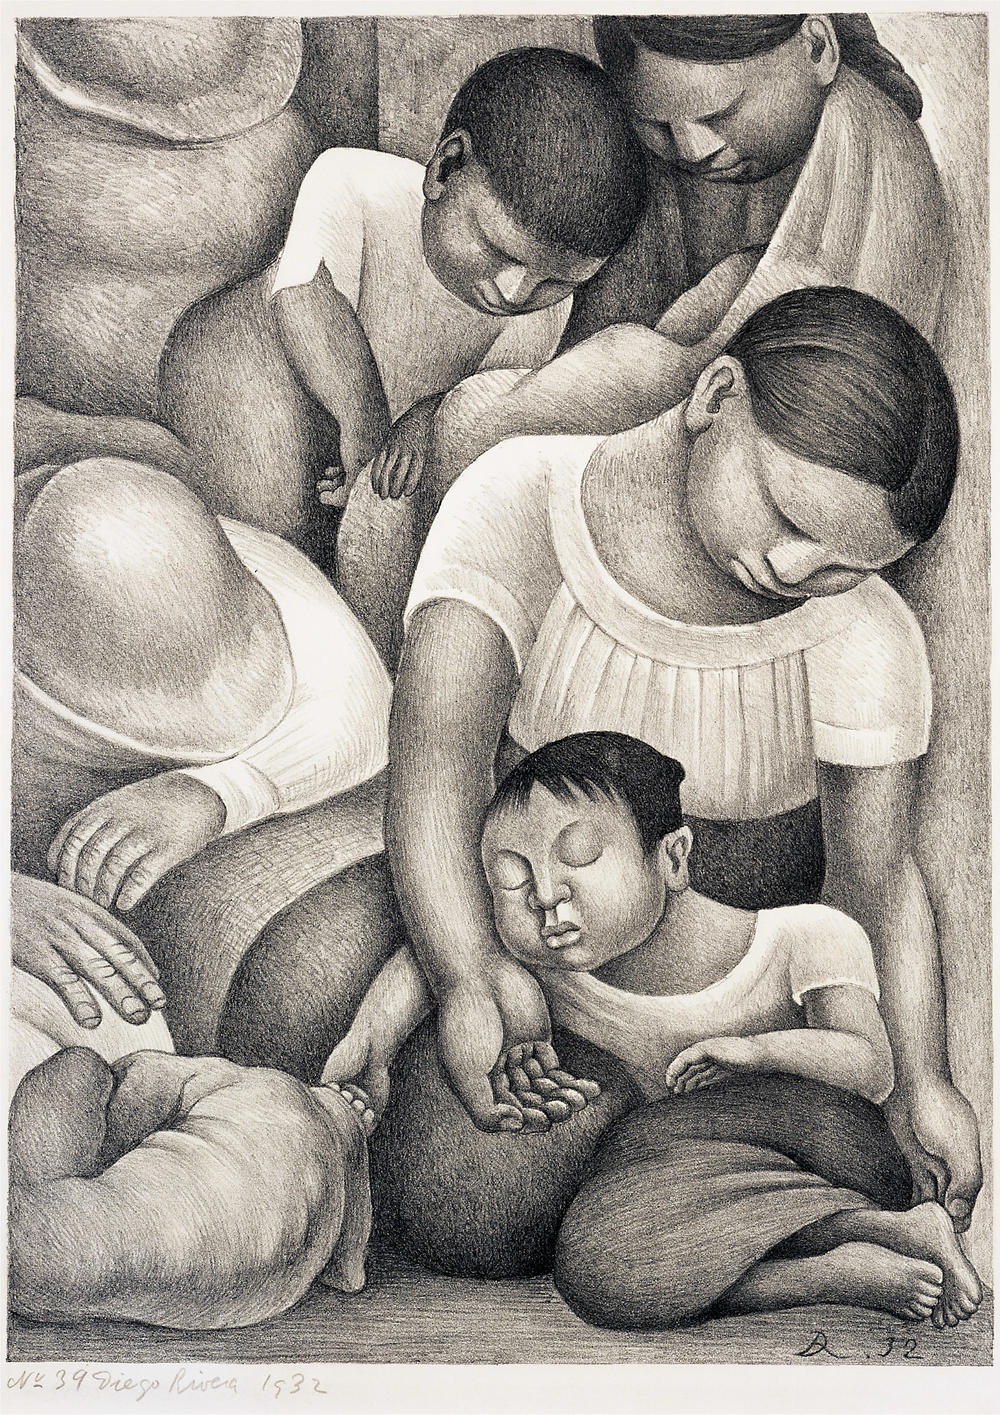 Diego Rivera, <em>Sleep,</em> 1932, lithograph. Collection of the McNay Art Museum, Museum purchase with funds from the Cullen Foundation, the Friends of the McNay, Charles Butt, Margaret Pace Wilson, and Jane and Arthur Stieren.